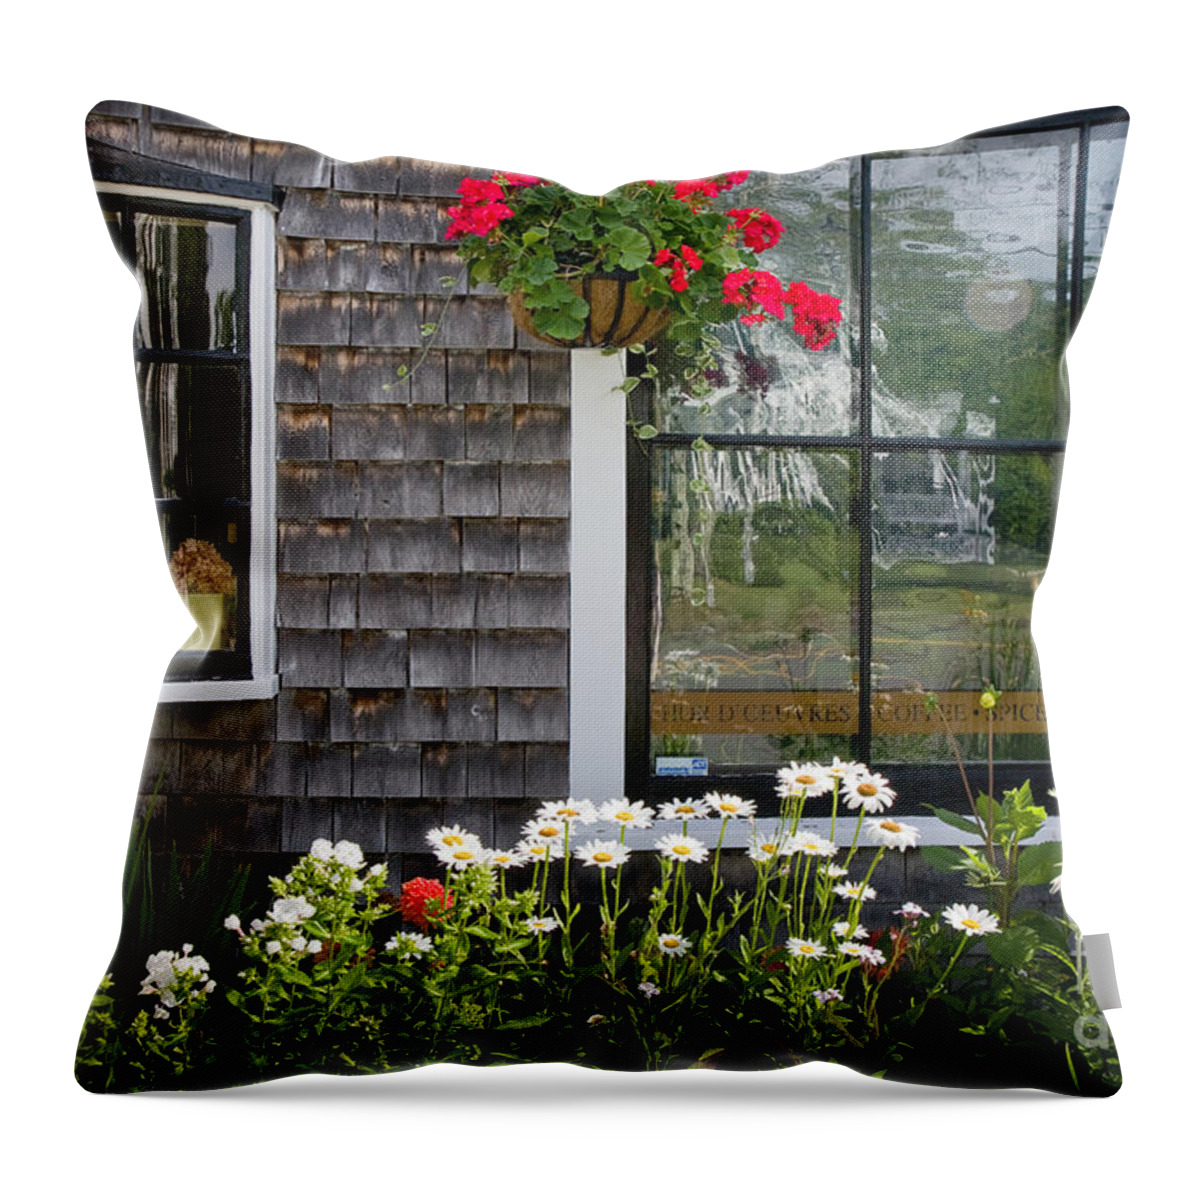 Alfresco Dining Throw Pillow featuring the photograph Cafe Windows by Susan Cole Kelly